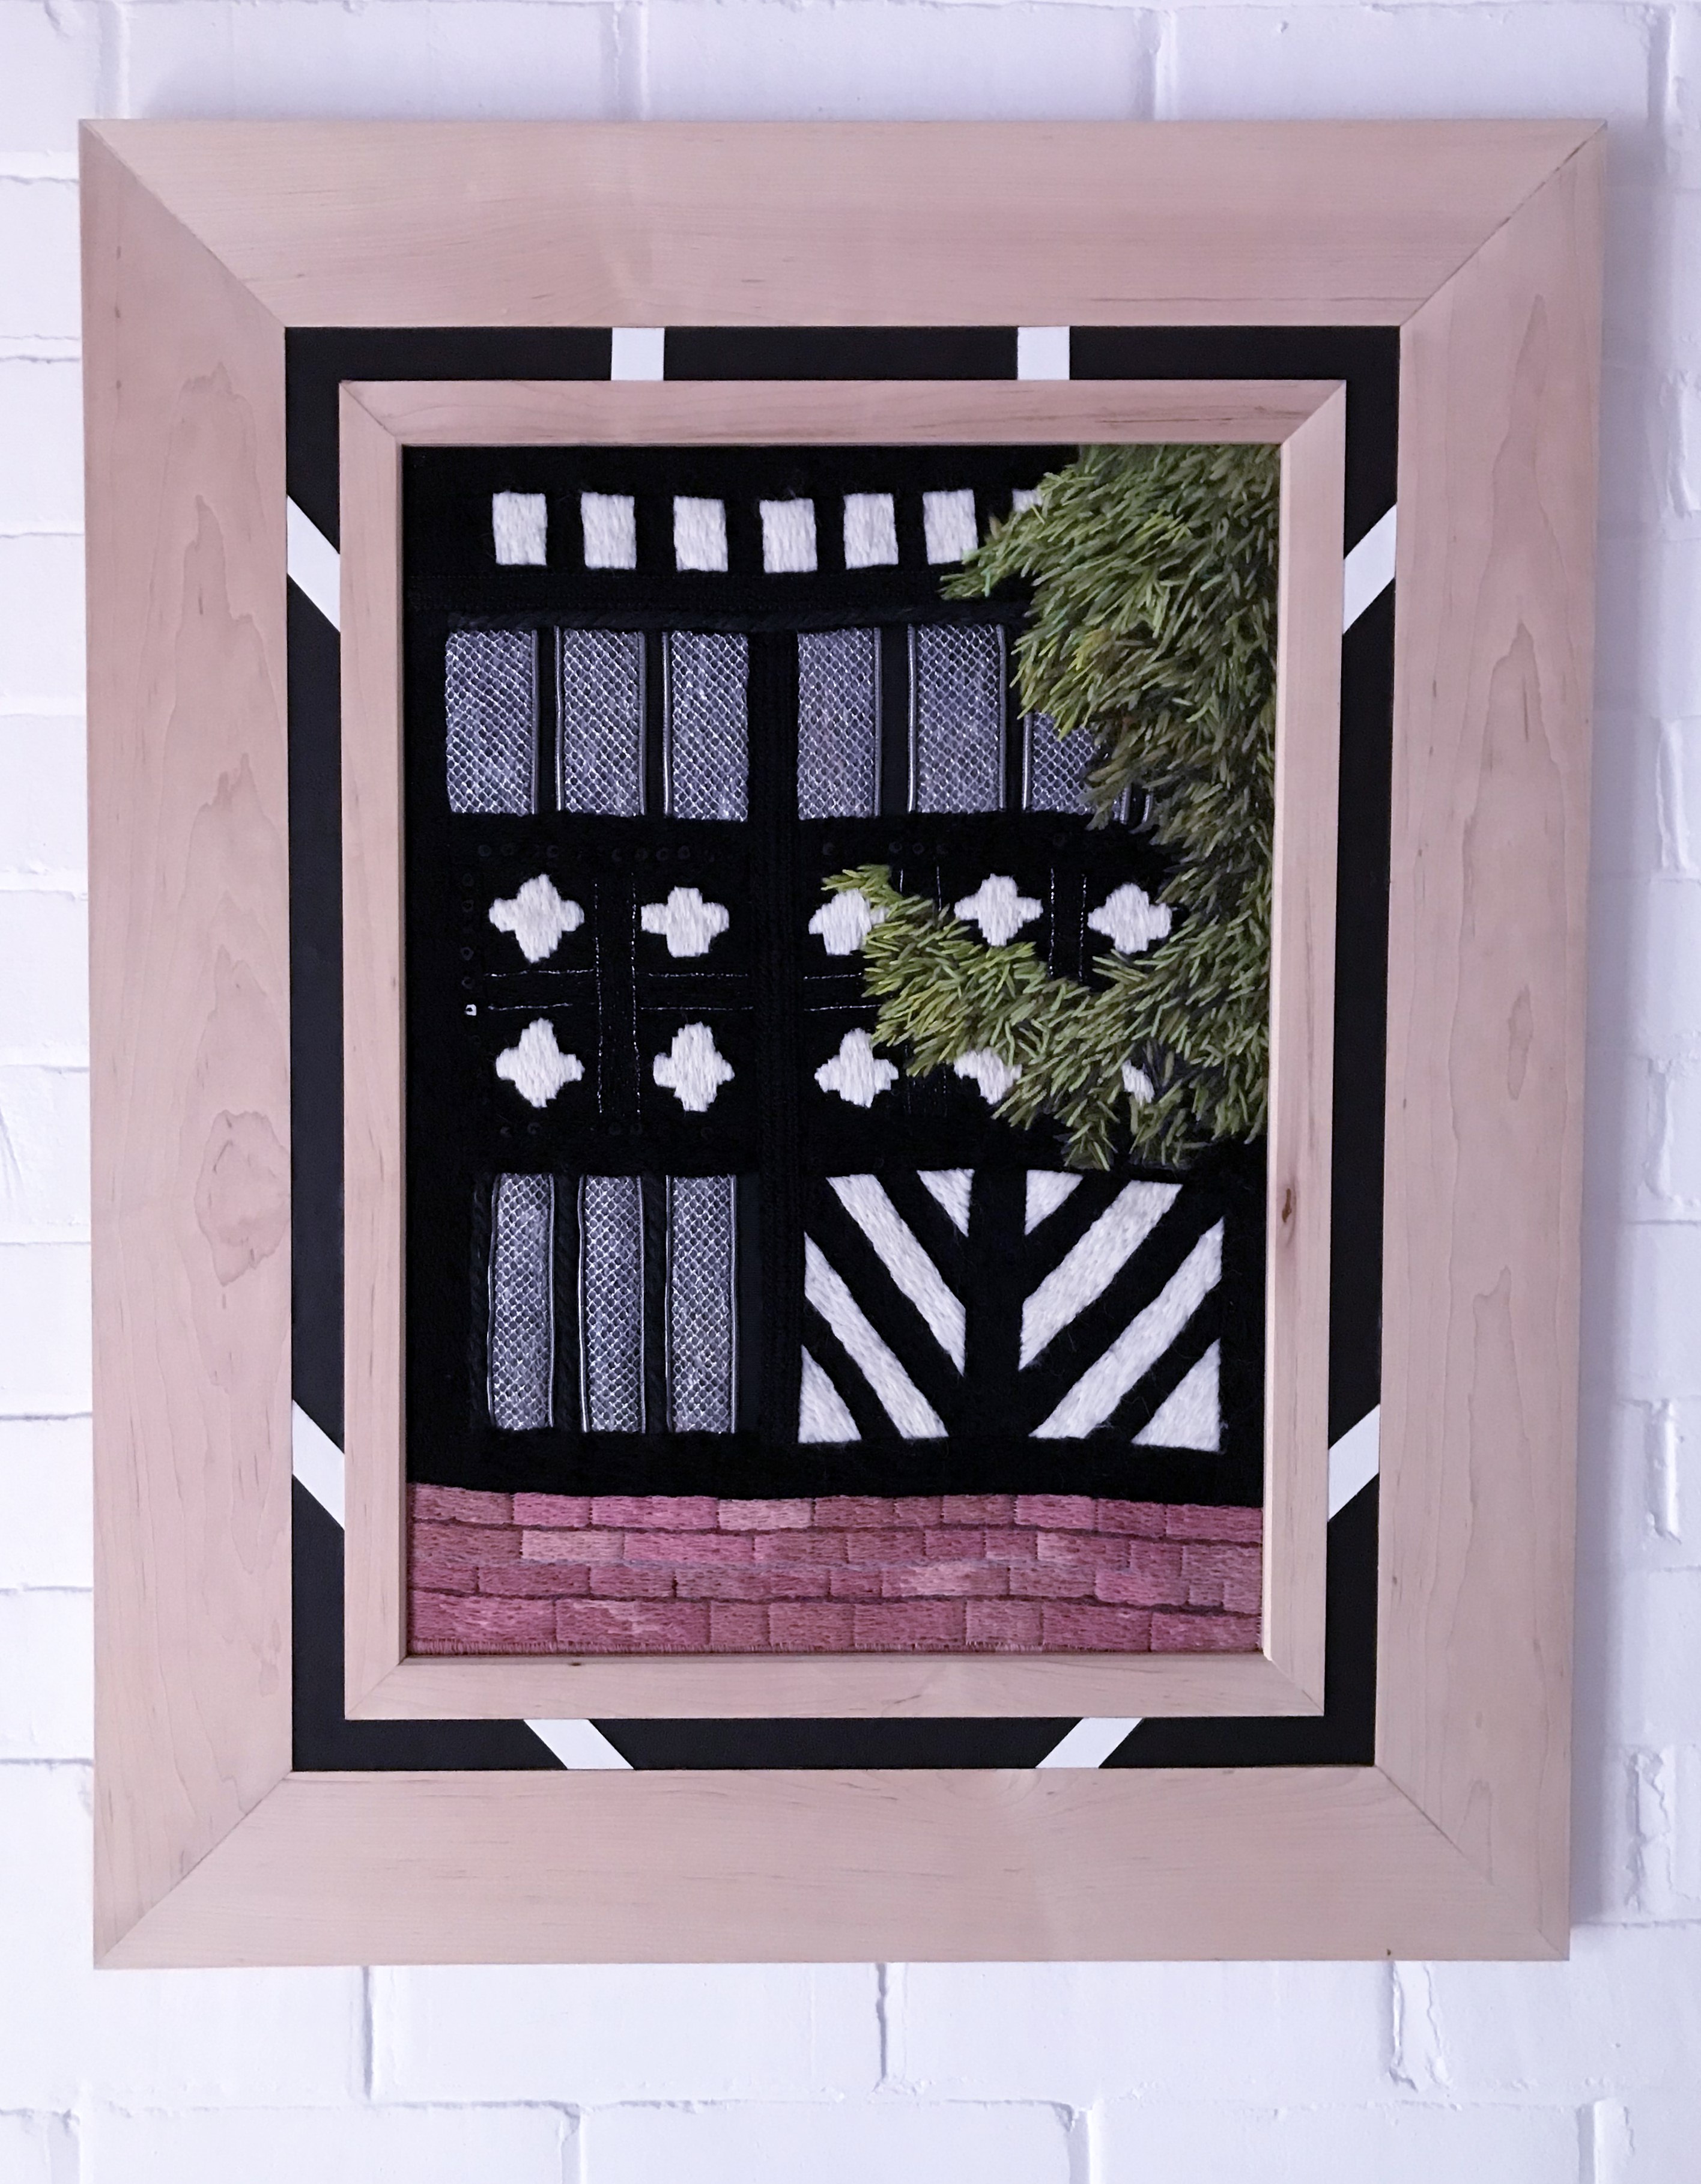 INNER COURTYARD AT SPEKE HALL by Patti Owen, hand embroidery and mixed media, MEG display at NW Regional Day 2021